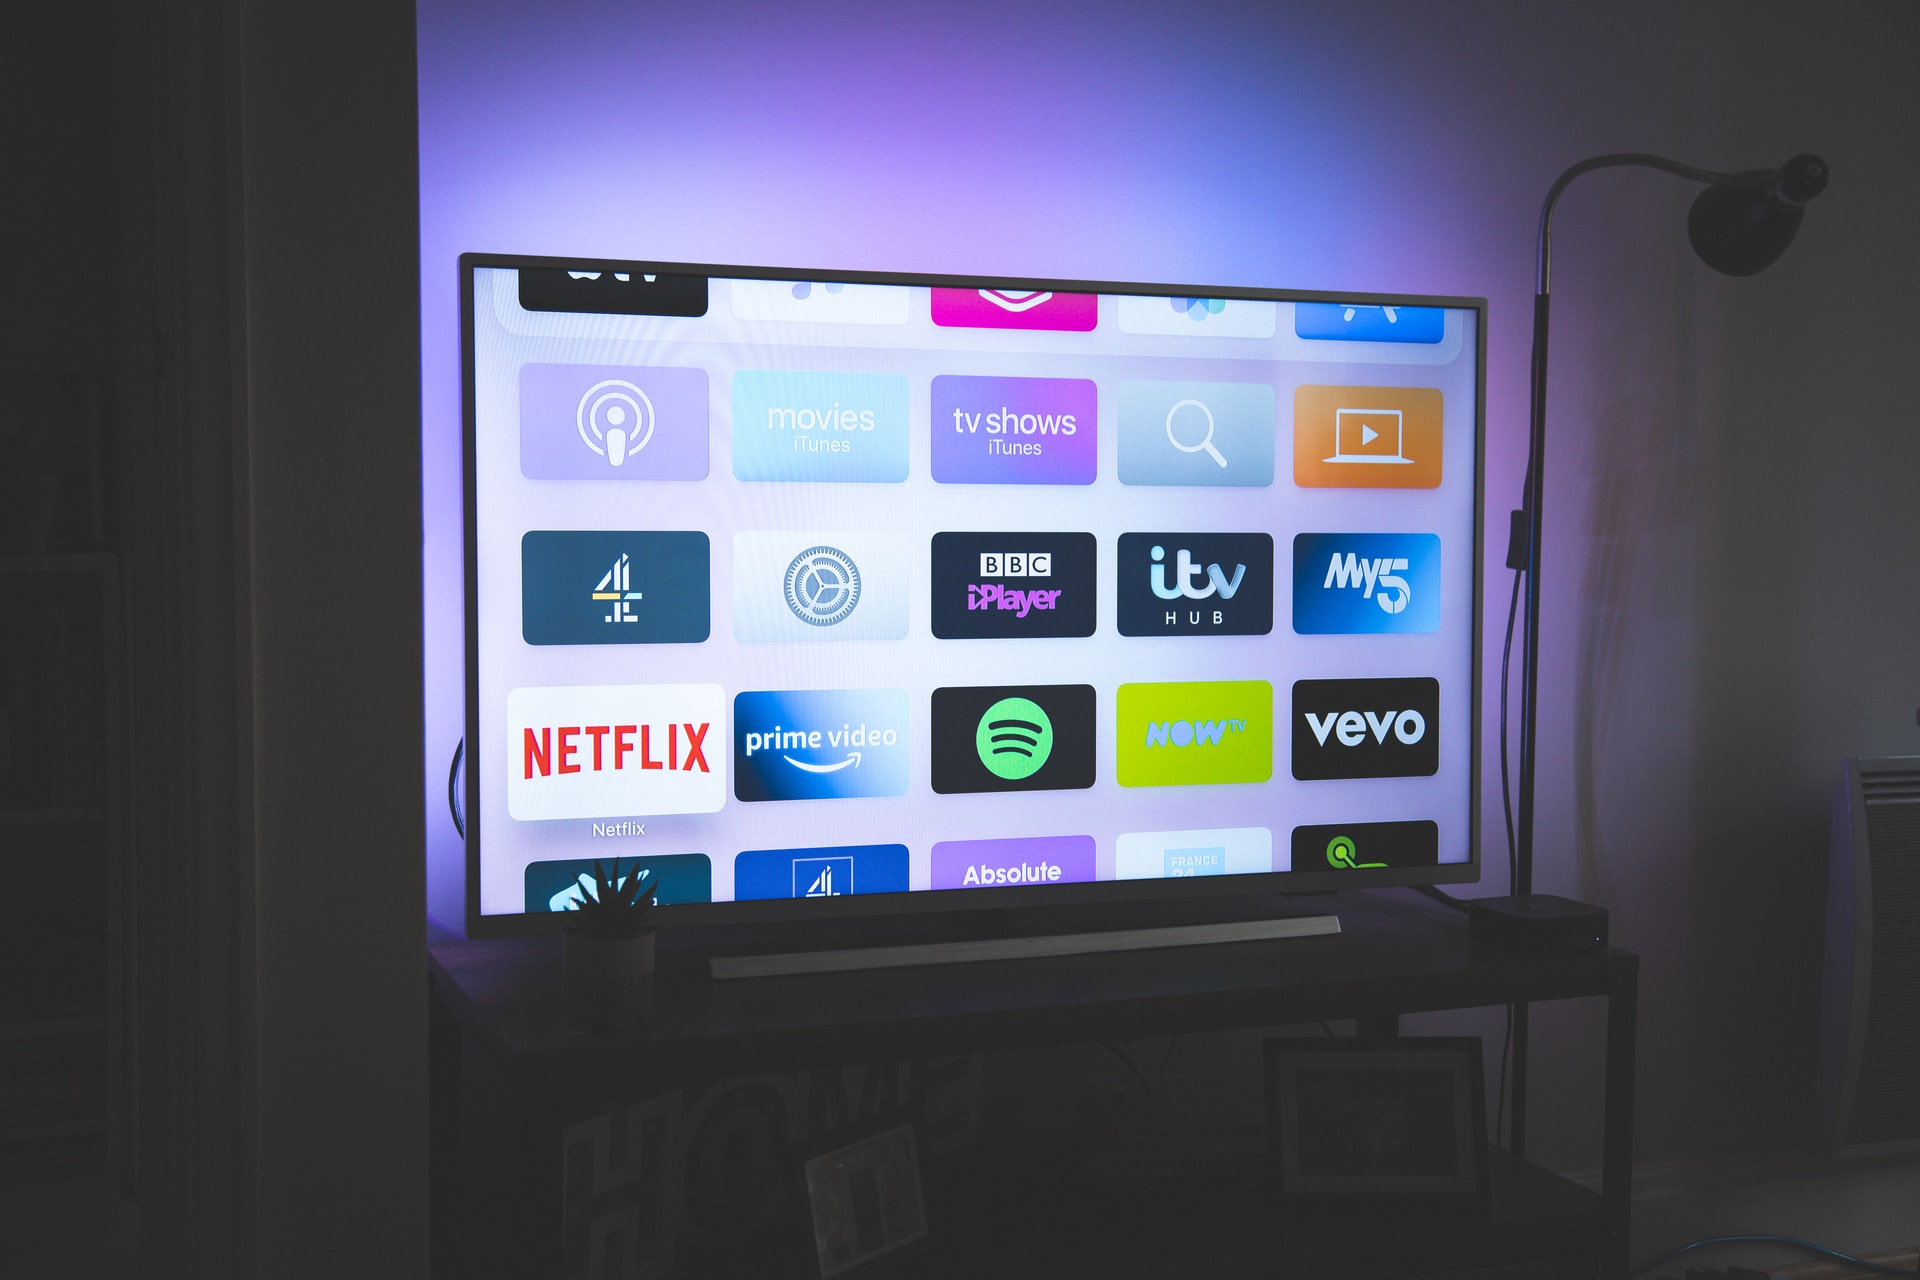 Best Live TV Streaming Services: Compare Top Picks for 2022